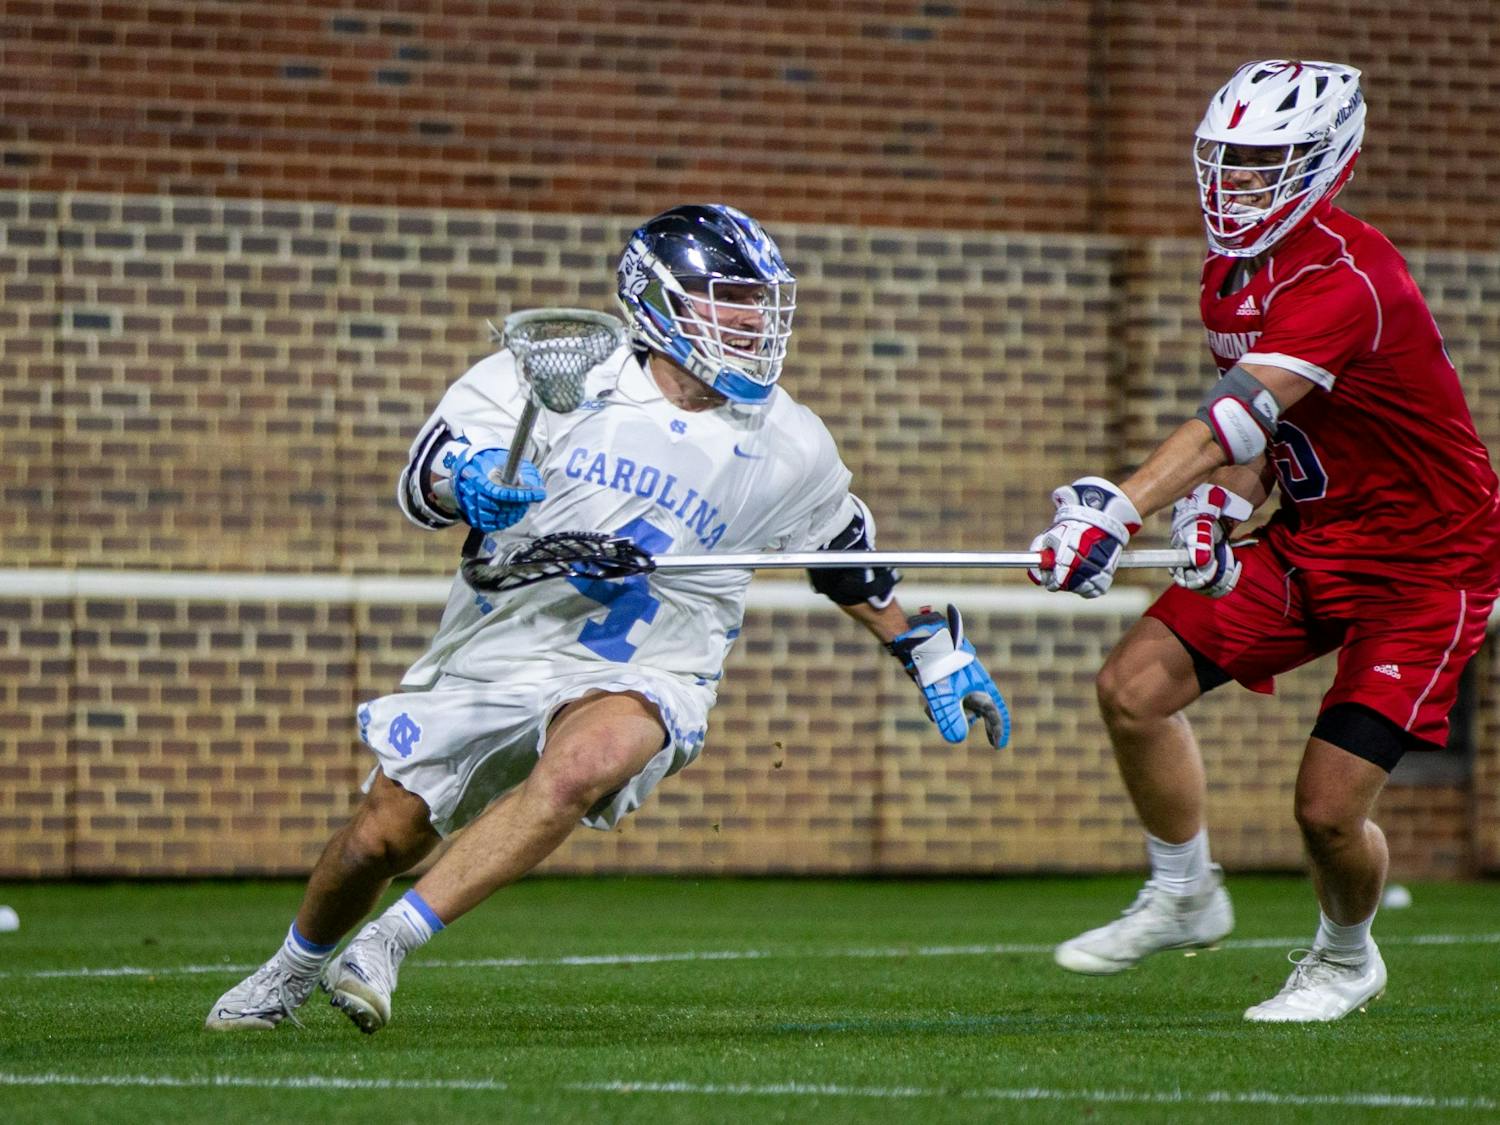 Graduate student attackman Chris Gray (4) is defended at the men's lacrosse game against Richmond on Feb. 11, 2022 at Dorrance Field in Chapel Hill. UNC won 13-9.